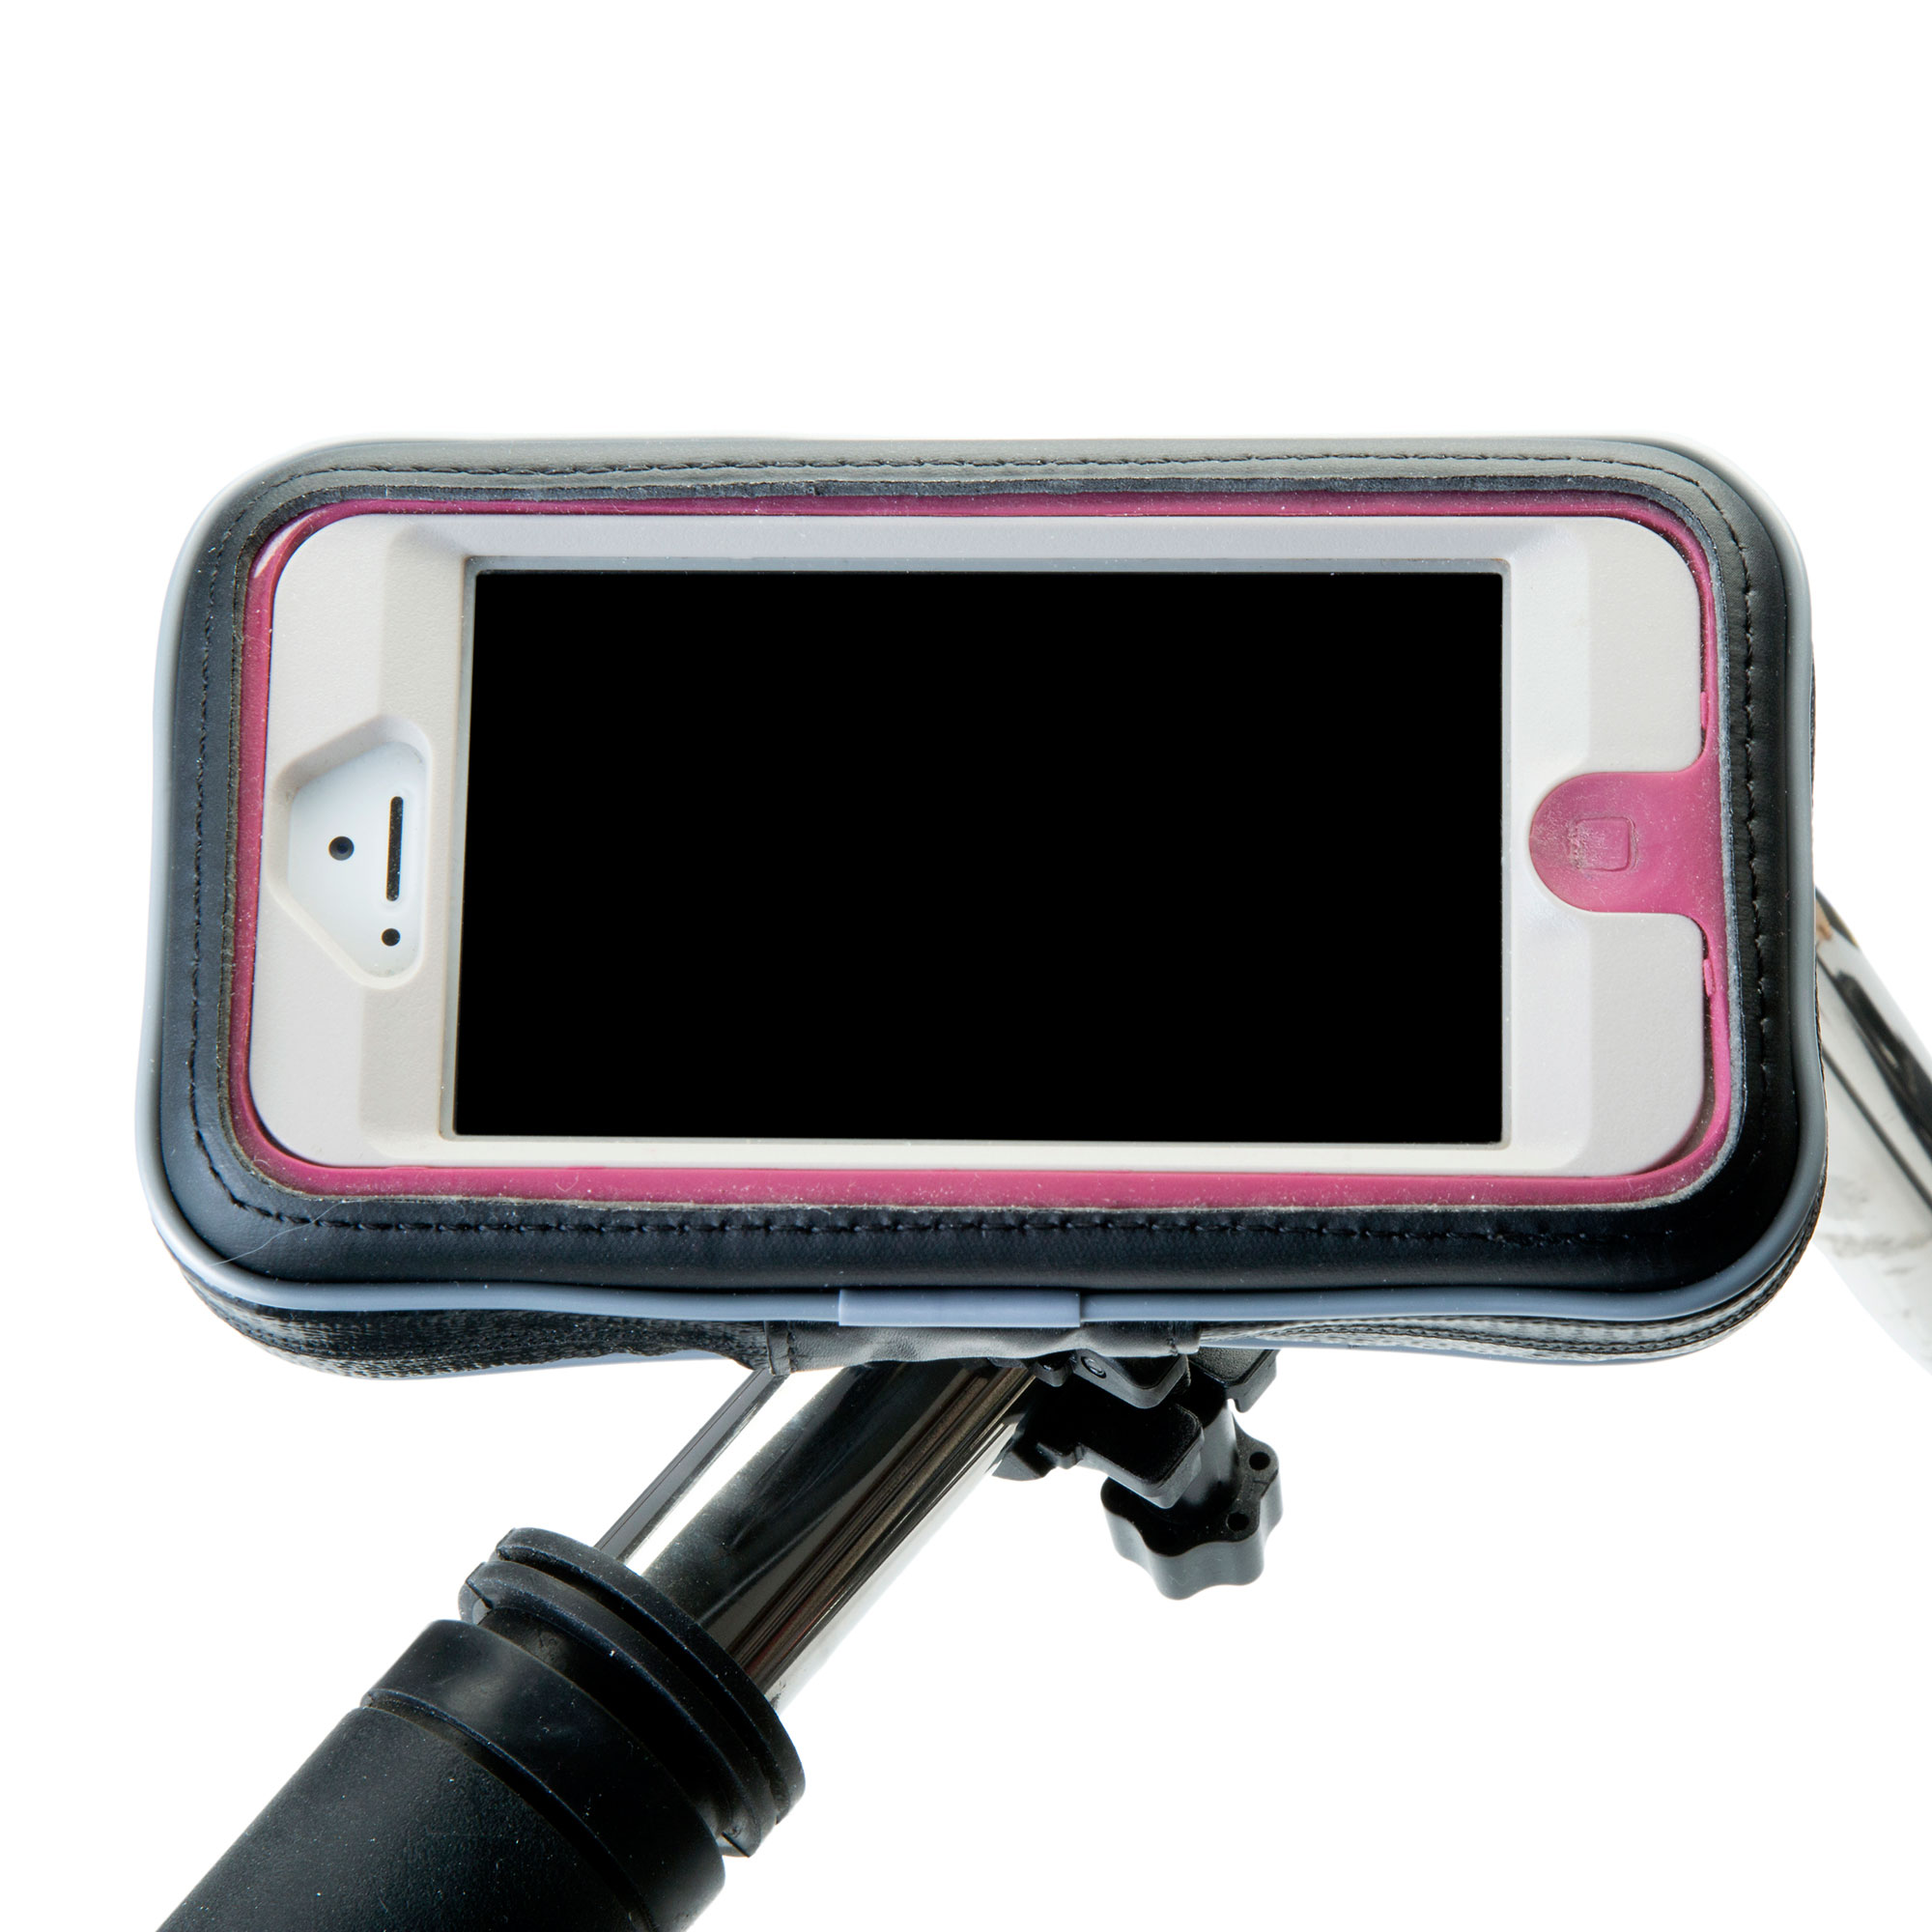 Heavy Duty Weather Resistant Bicycle / Motorcycle Handlebar Mount Holder Designed for the Samsung Gravity TXT